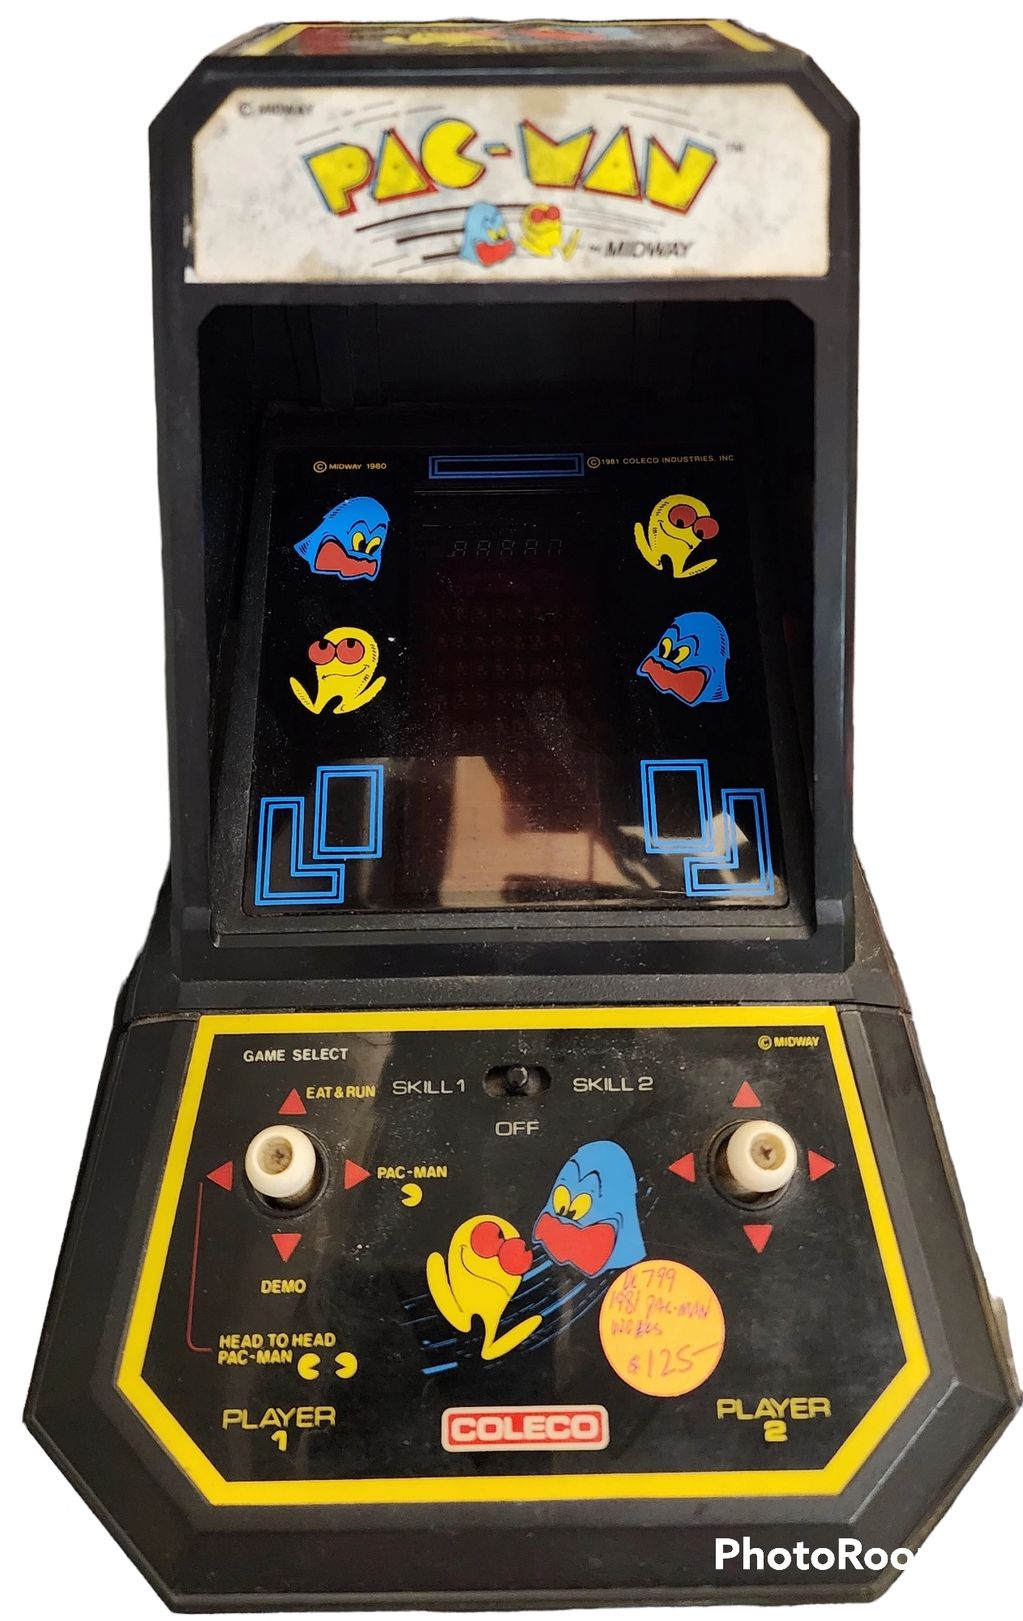 1981 Coleco Pac-Man by Midway Arcade Game. 